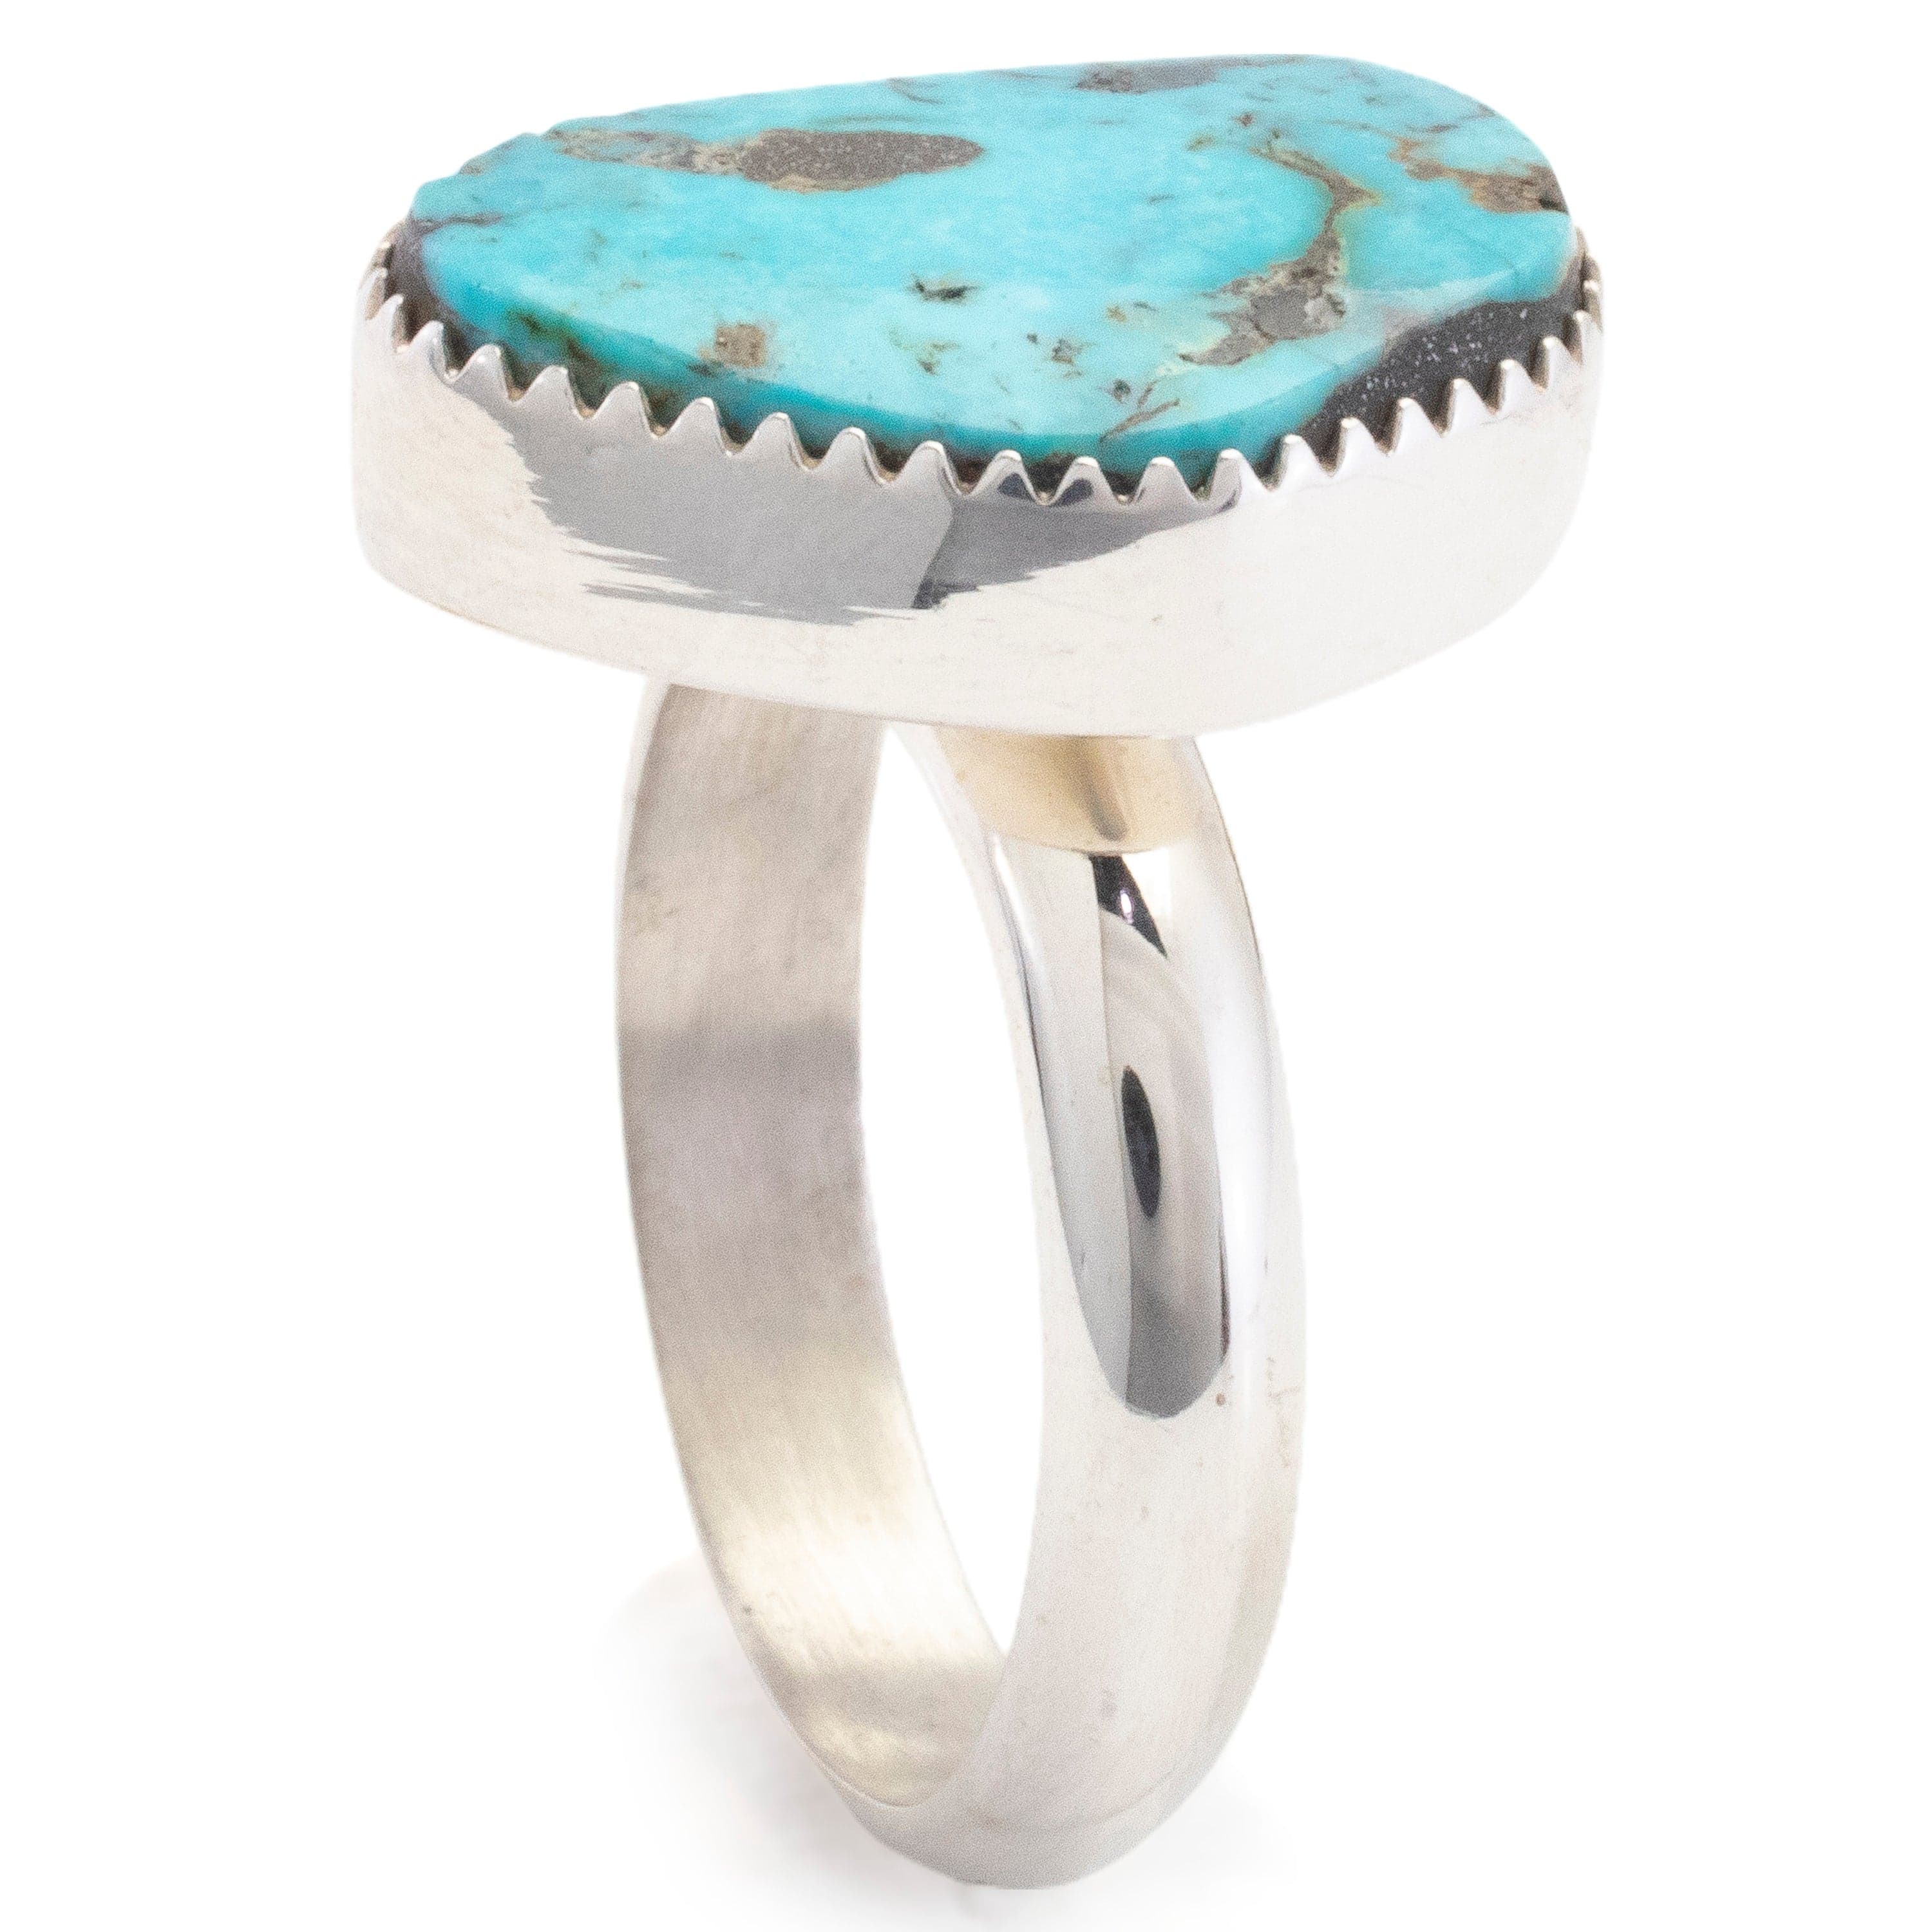 Kalifano Southwest Silver Jewelry 11 Kingman Turquoise USA Handmade 925 Sterling Silver Ring NMR350.001.11